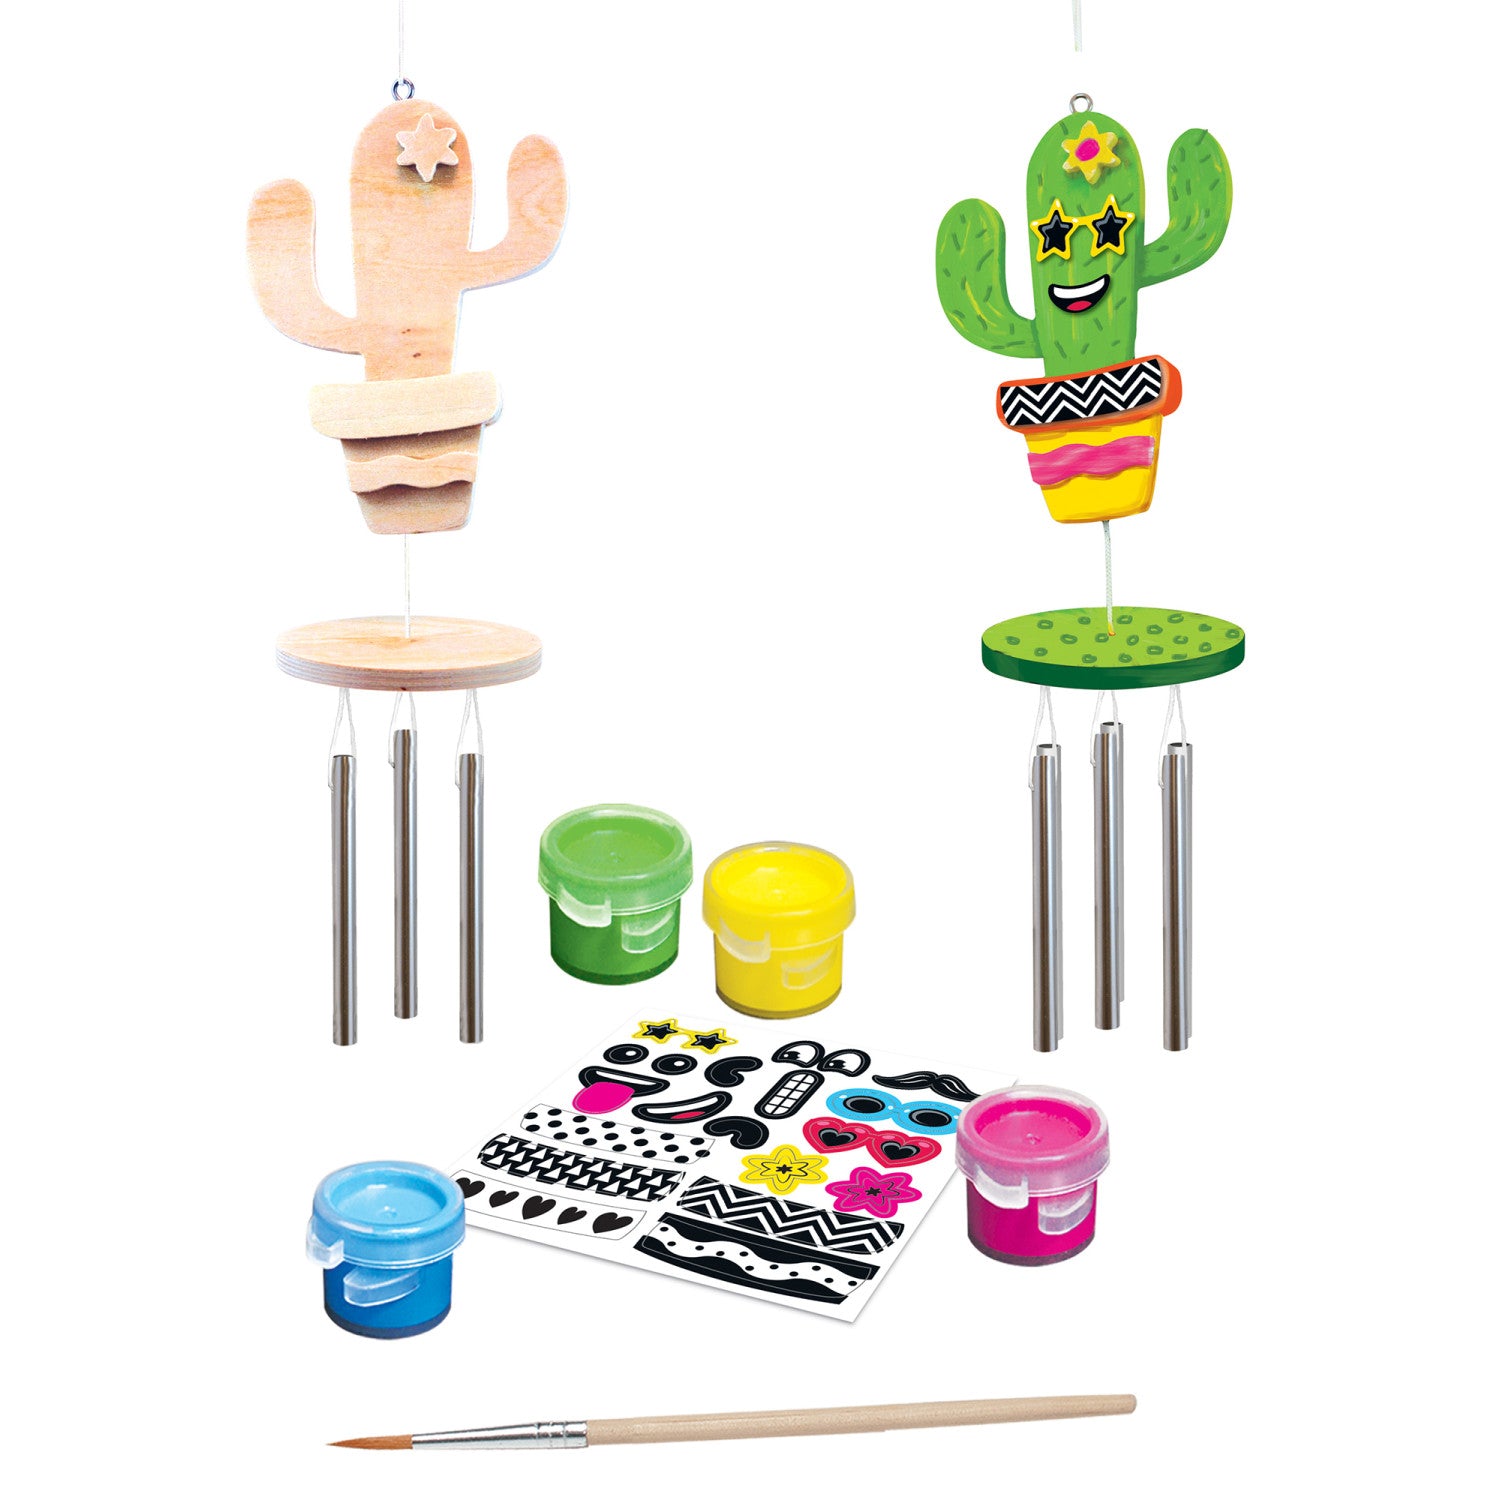 Cactus Wind Chime - Small Wood Craft Kit